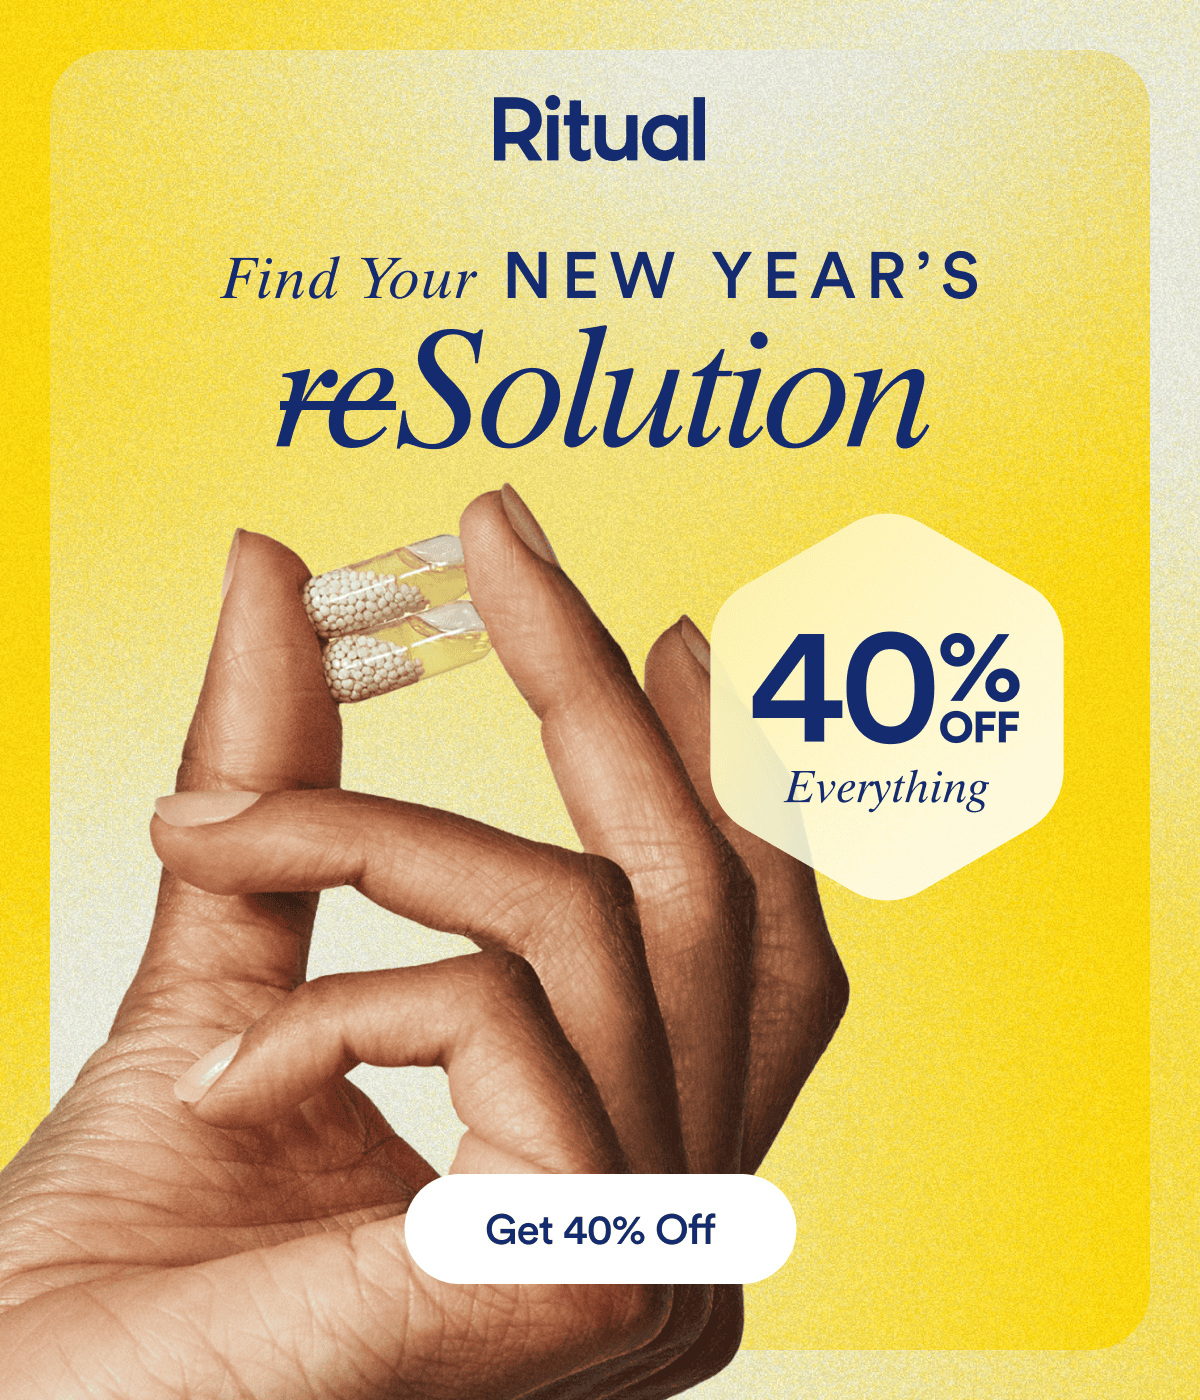 Ritual | Find Your NEW YEAR'S reSolution | 40% Everything | Get 40% Off